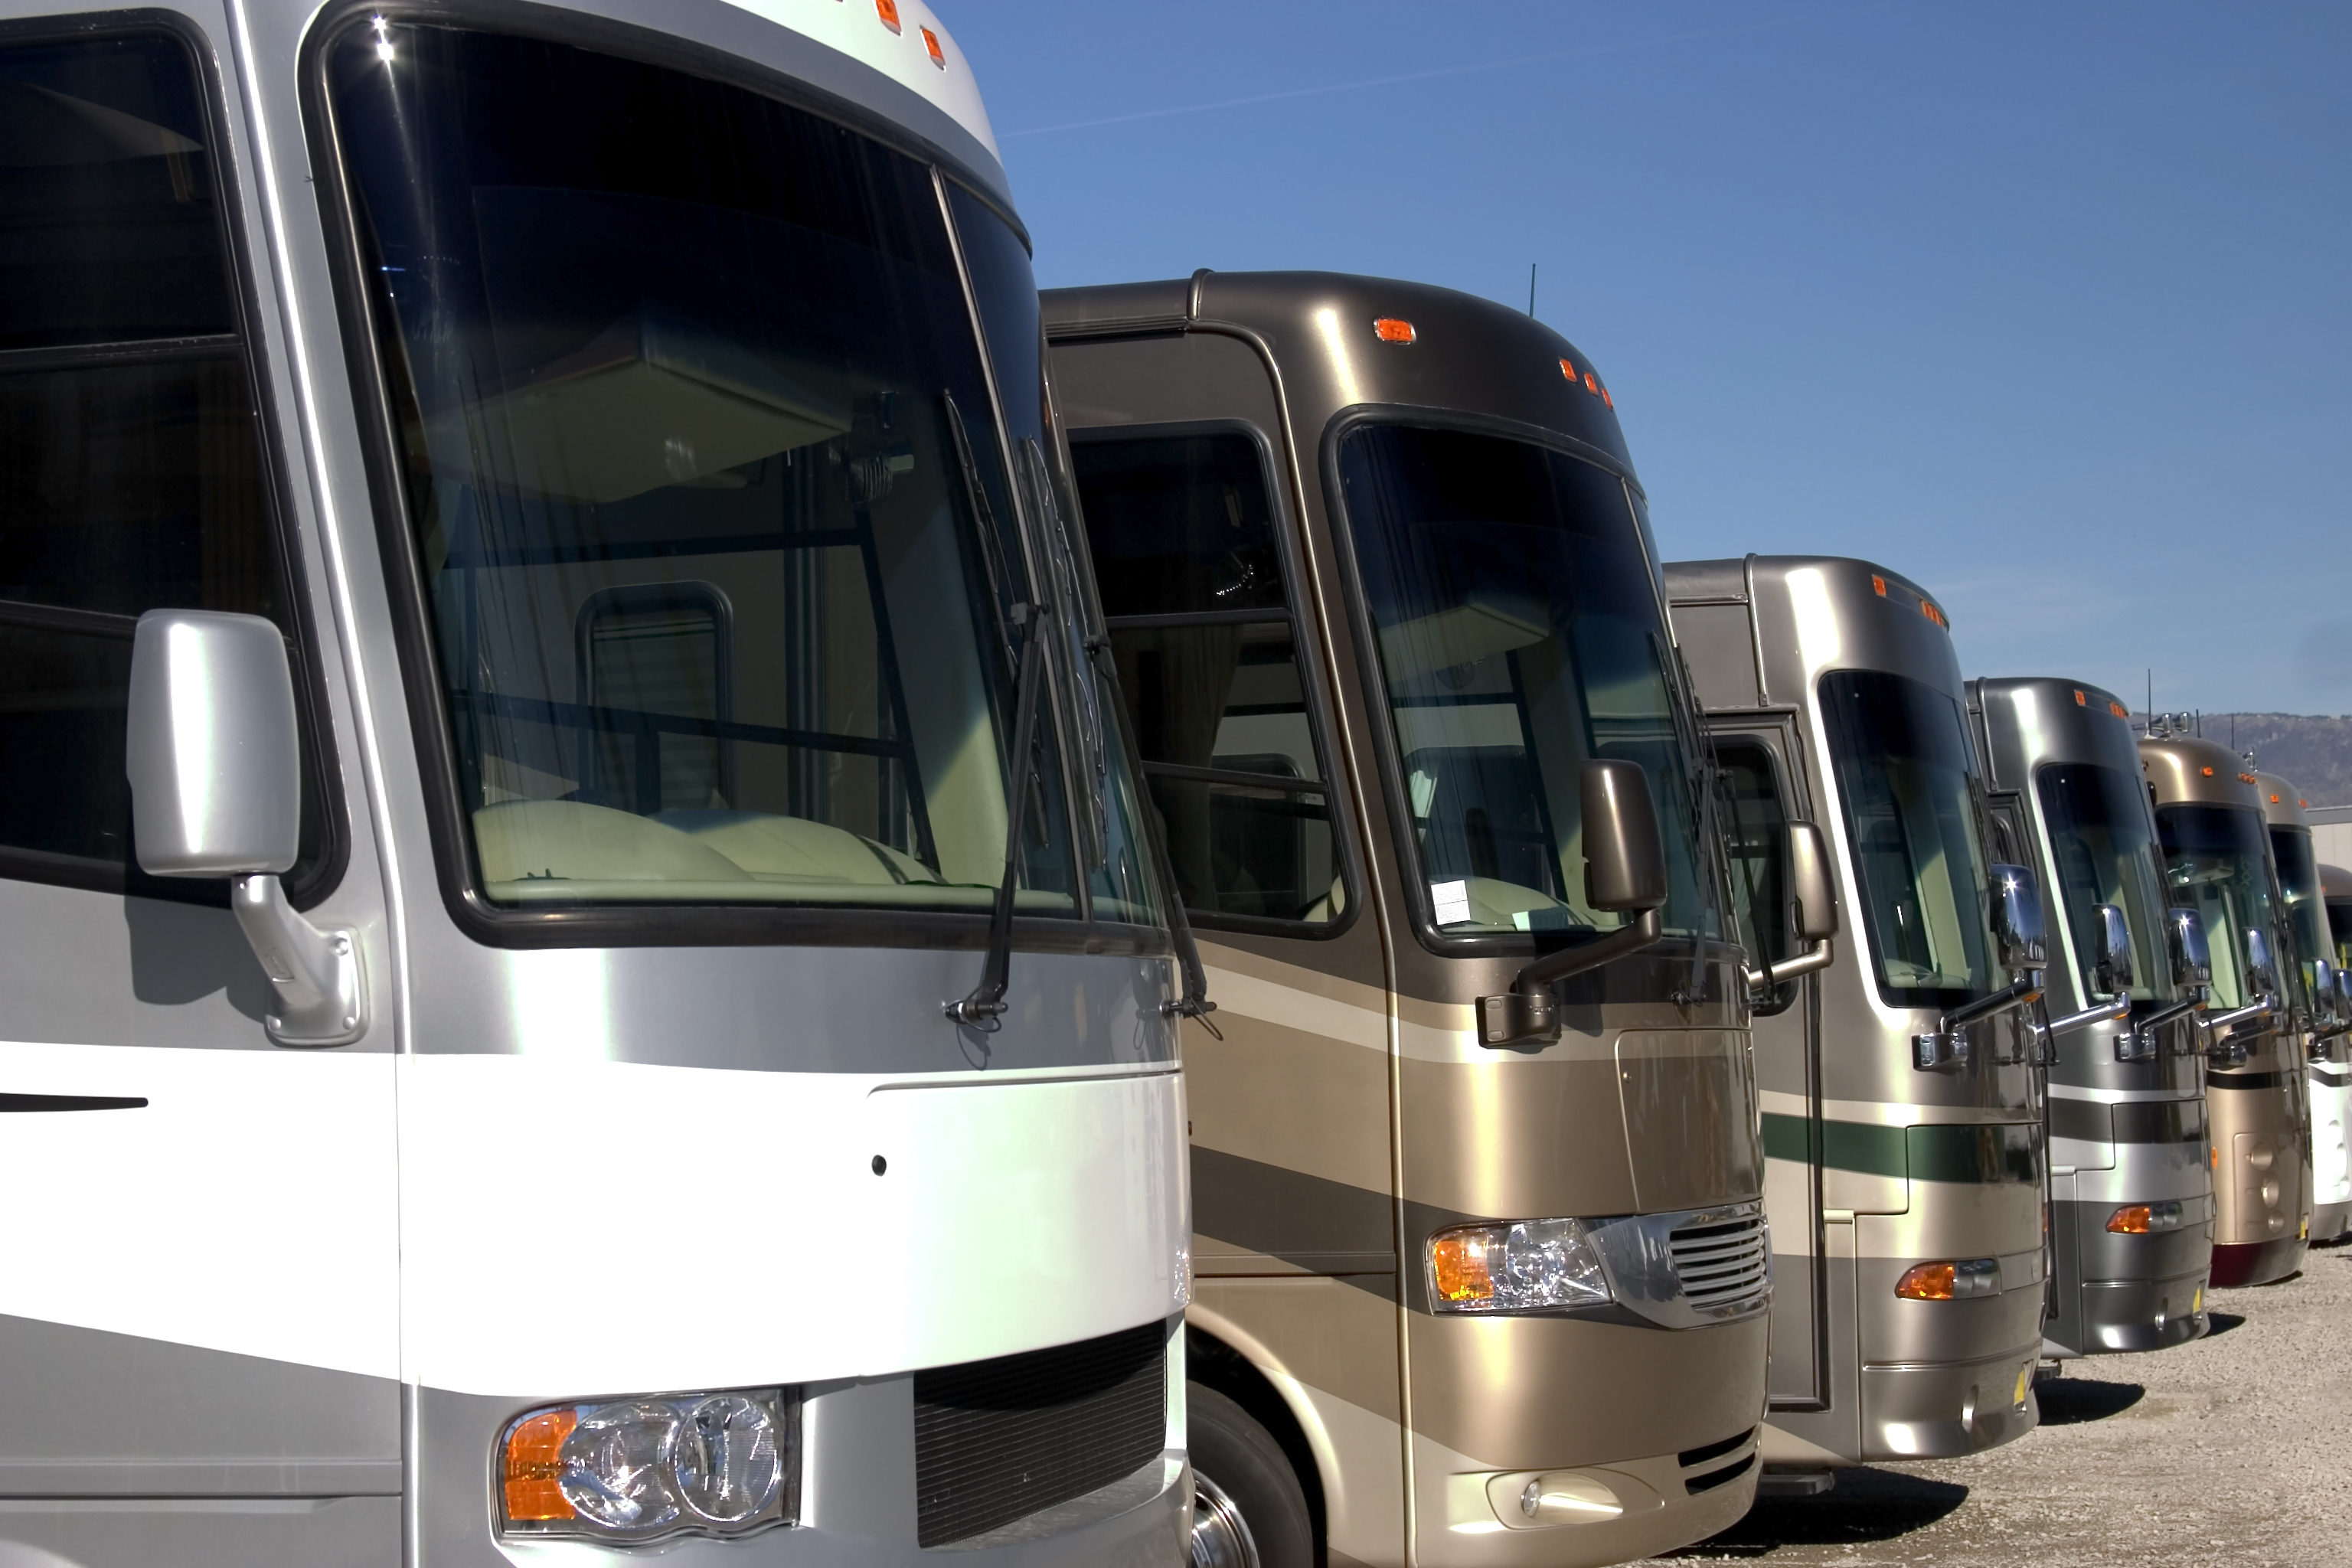 RV vehicles lined up in a row